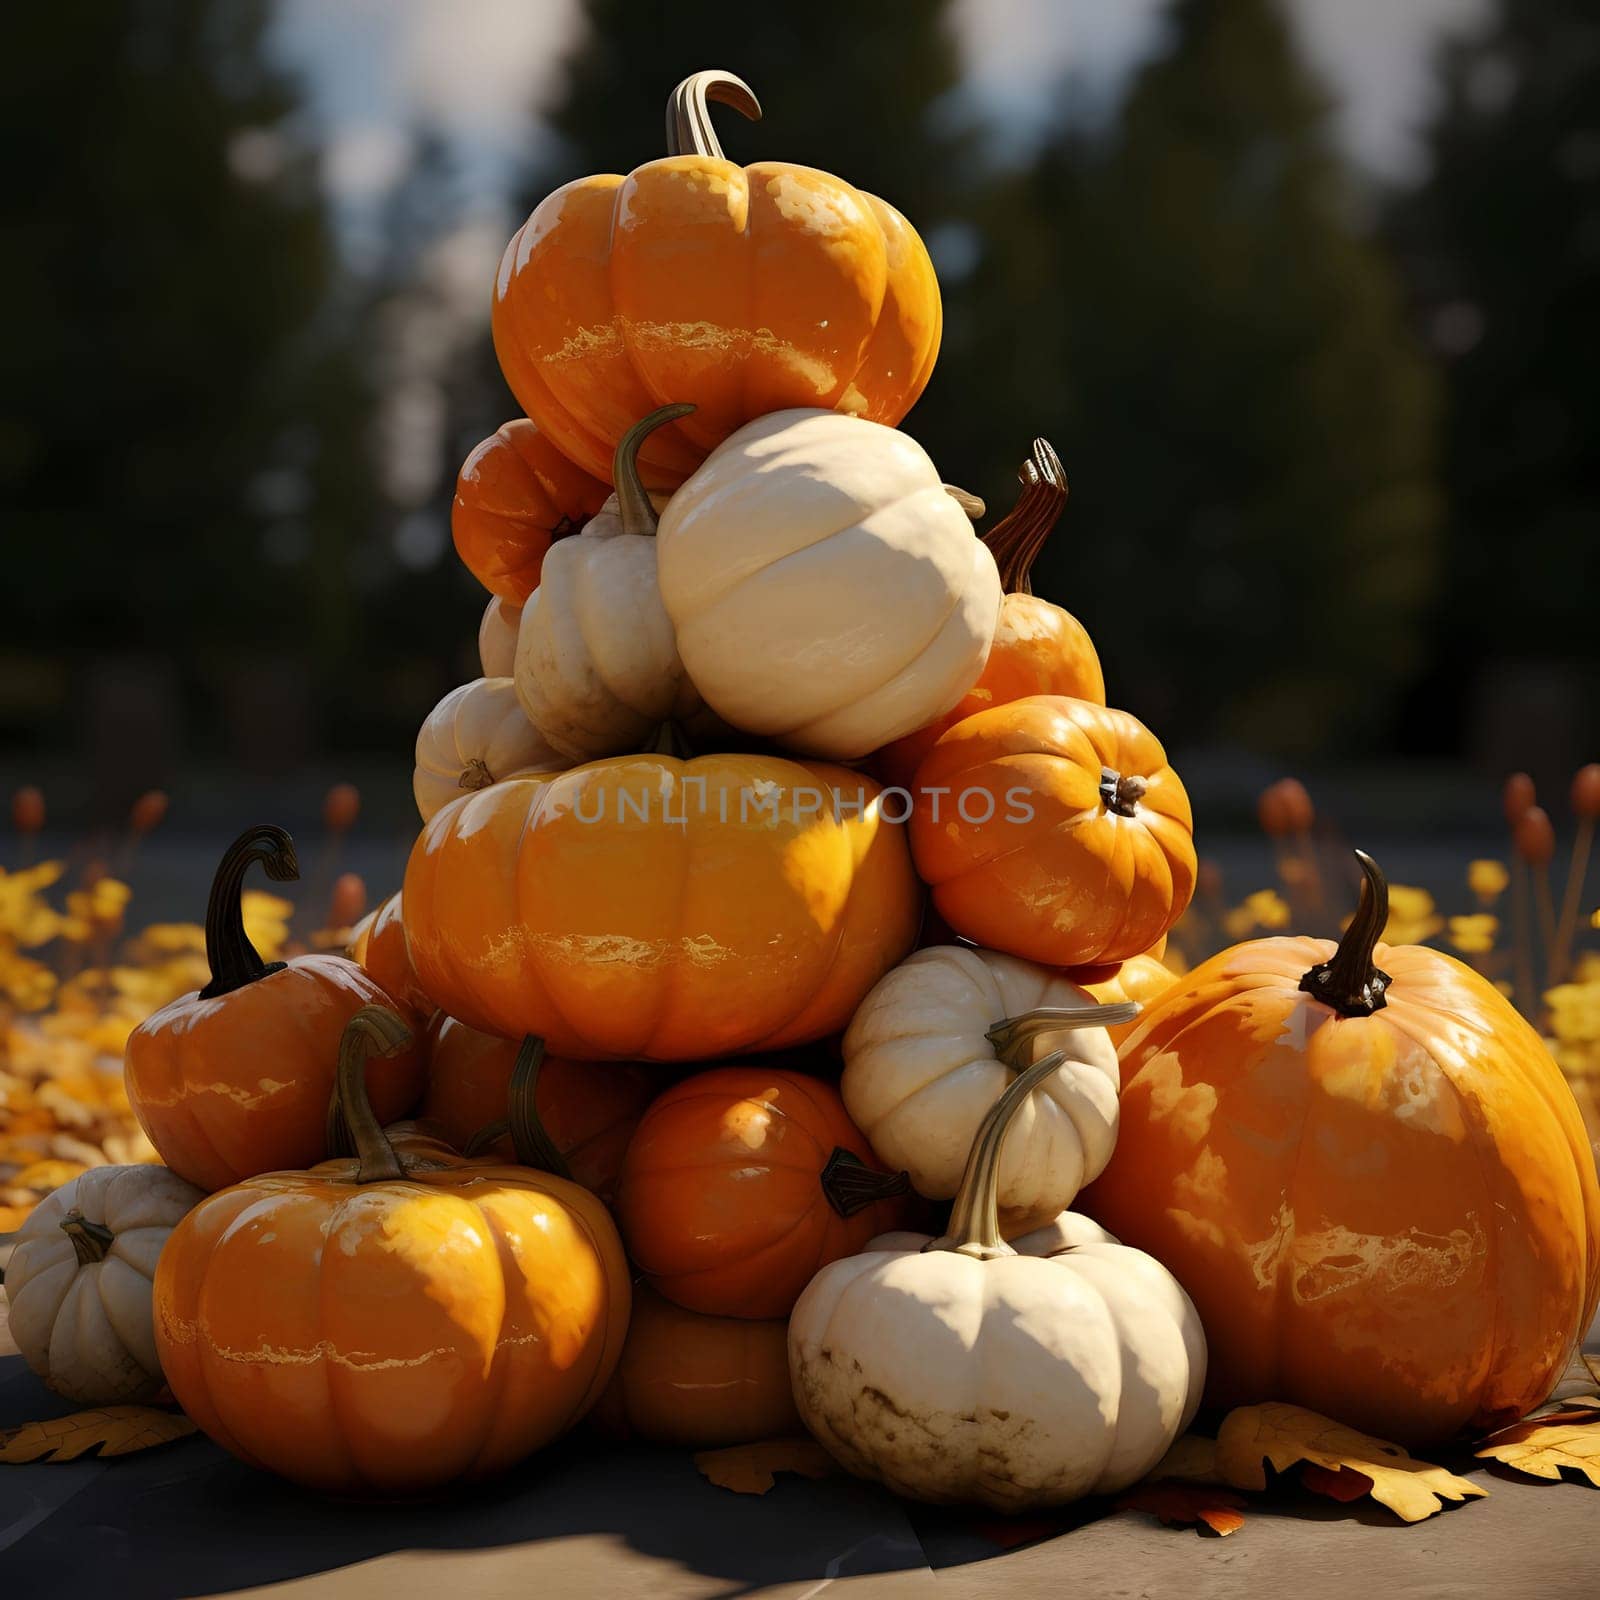 A heap of colorful pumpkins. Pumpkin as a dish of thanksgiving for the harvest. The atmosphere of joy and celebration.